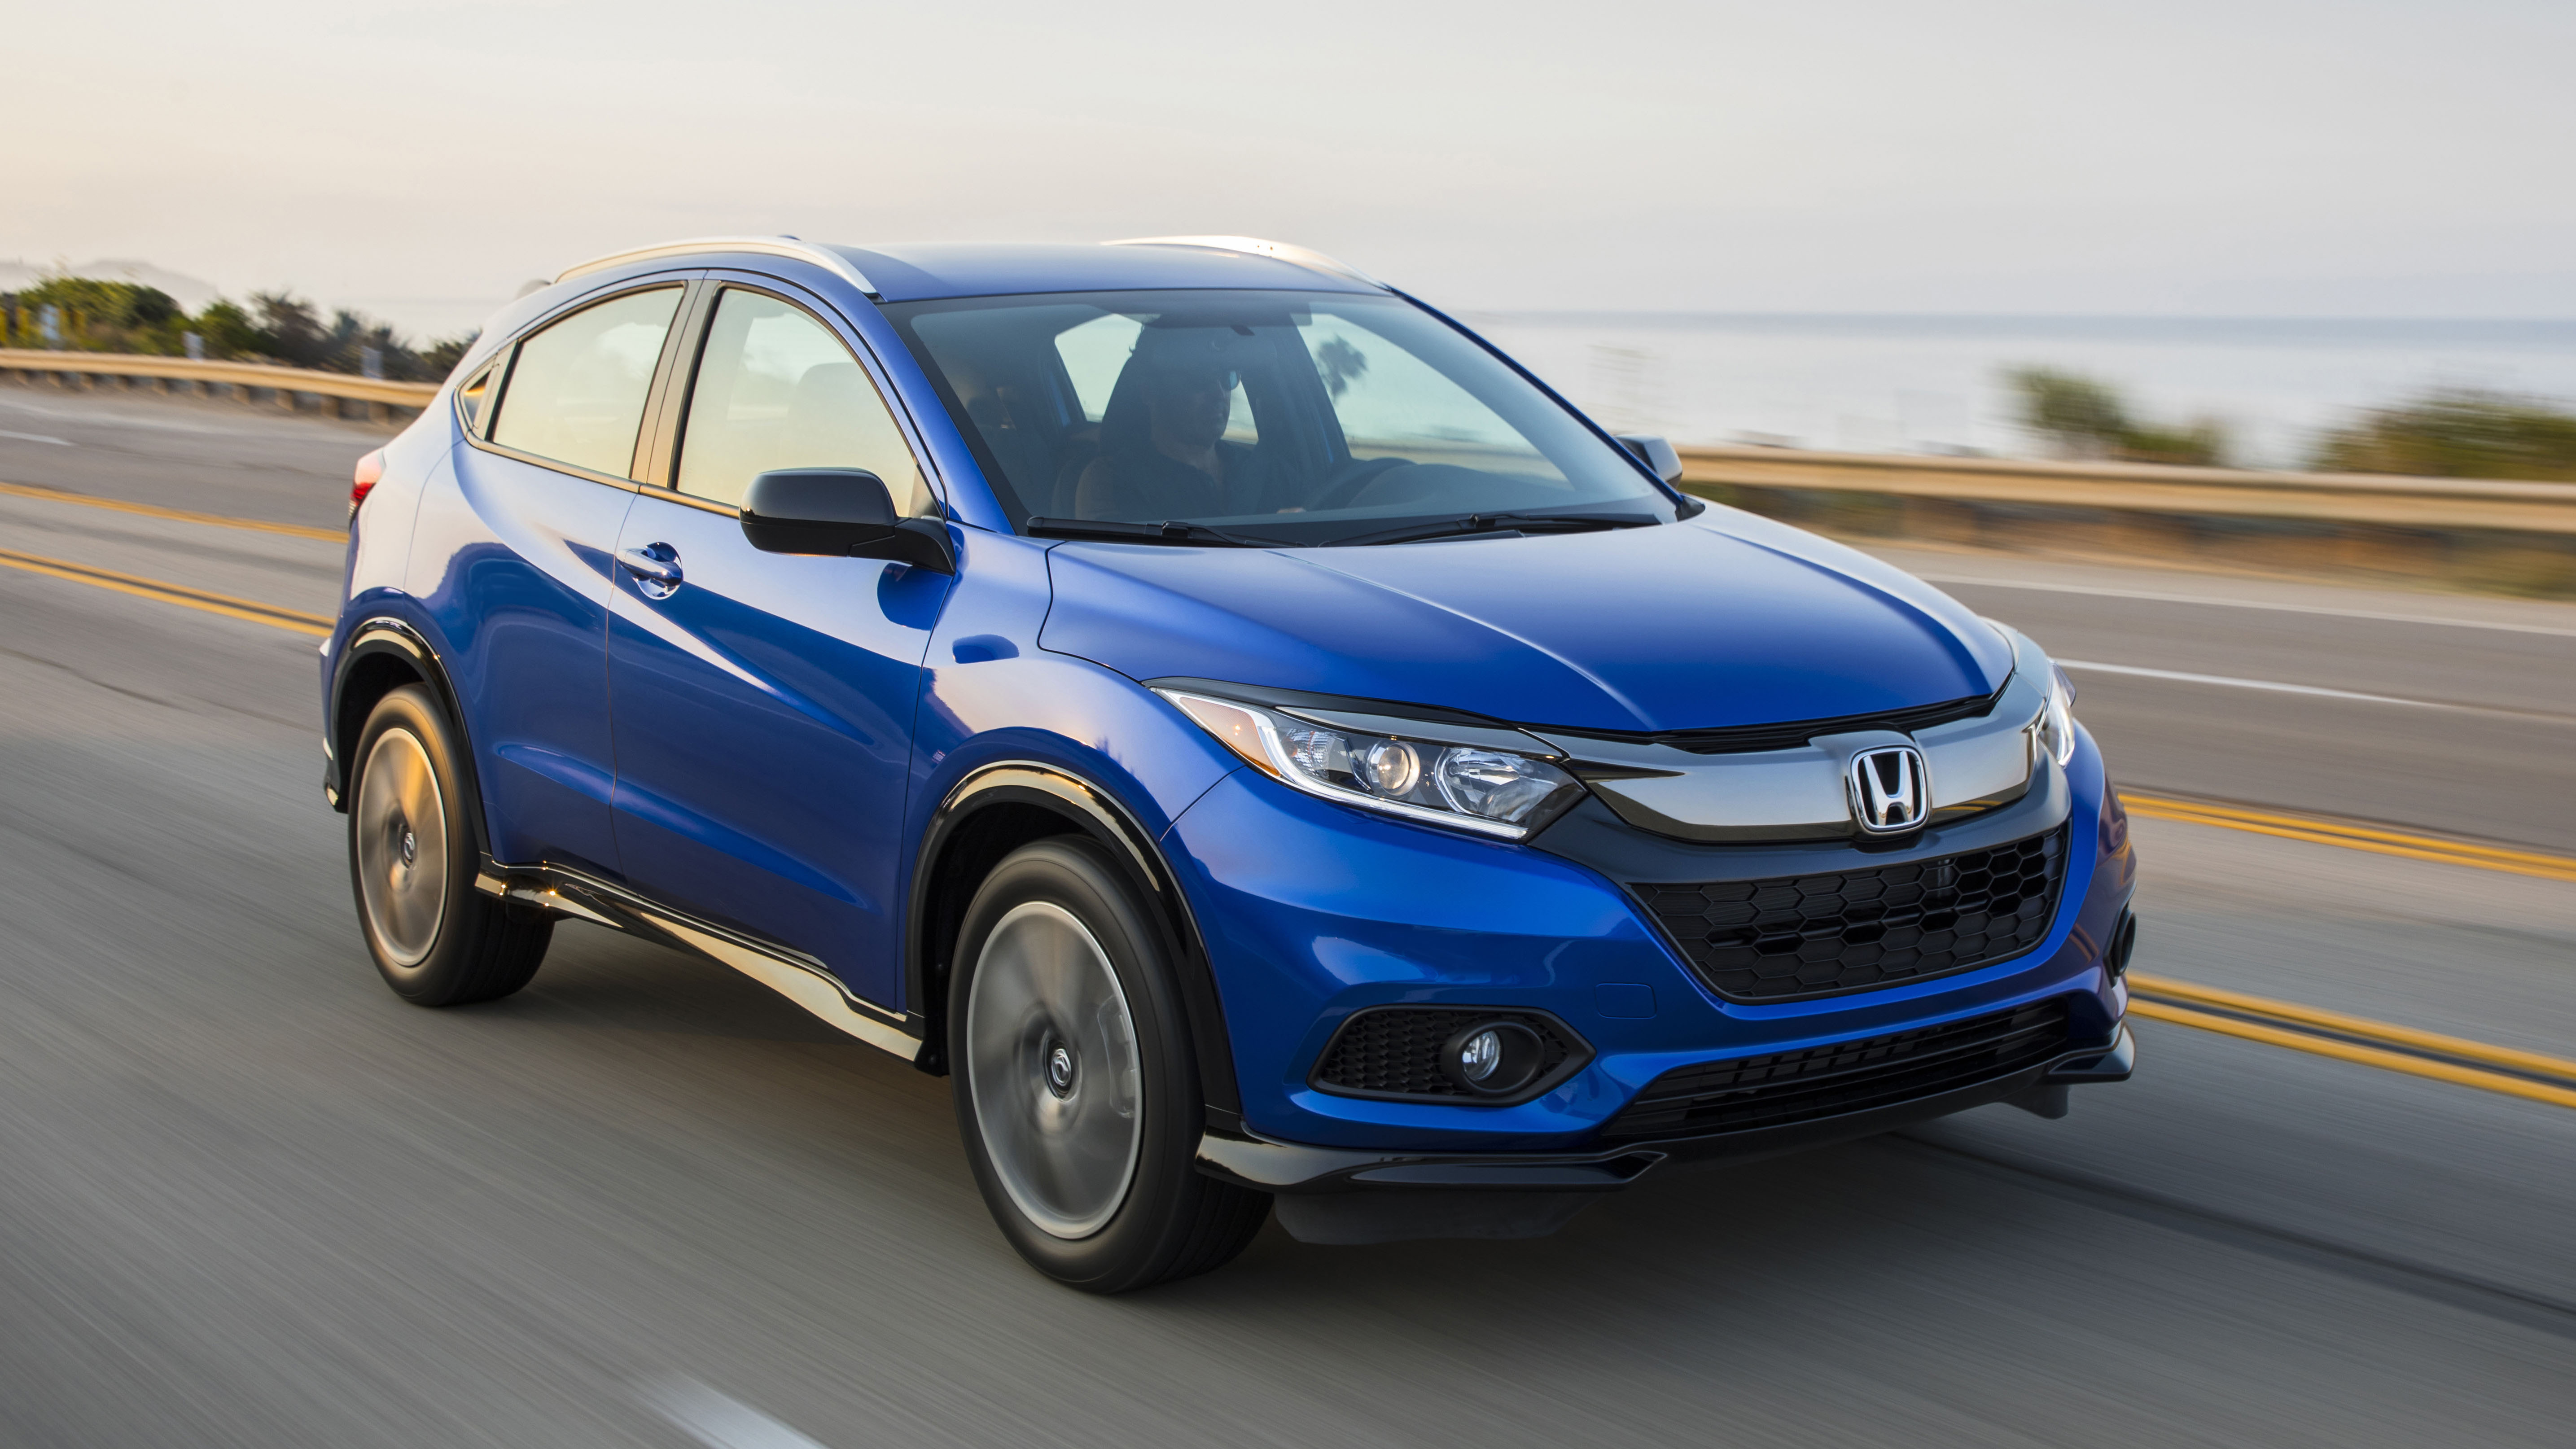 2020-honda-hr-v-pricing-increases-without-extra-features-autoblog